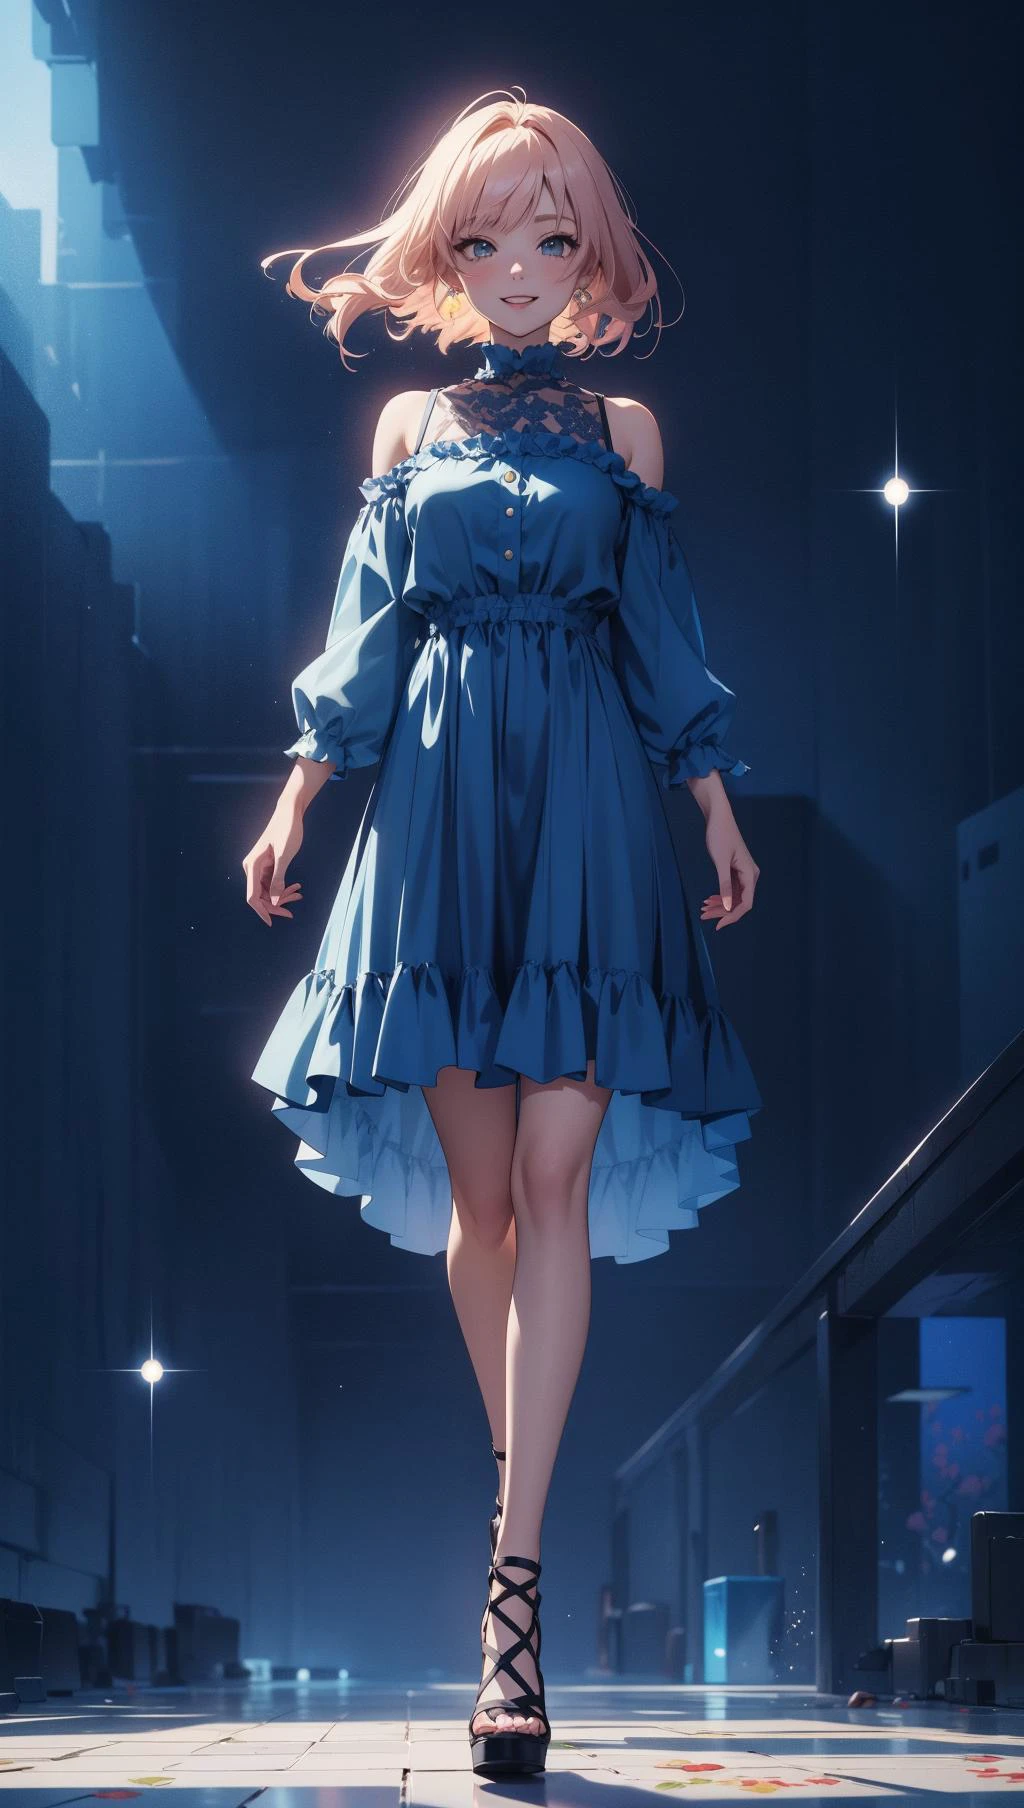 anime opening,(woman),solo,a dreamscape aesthetic in Cobalt blue theme atmosphere,mosaic background,happy,floral,(wallpaper style),movie trailer,cinematic,screencap,still shot,true perception,comfortable,